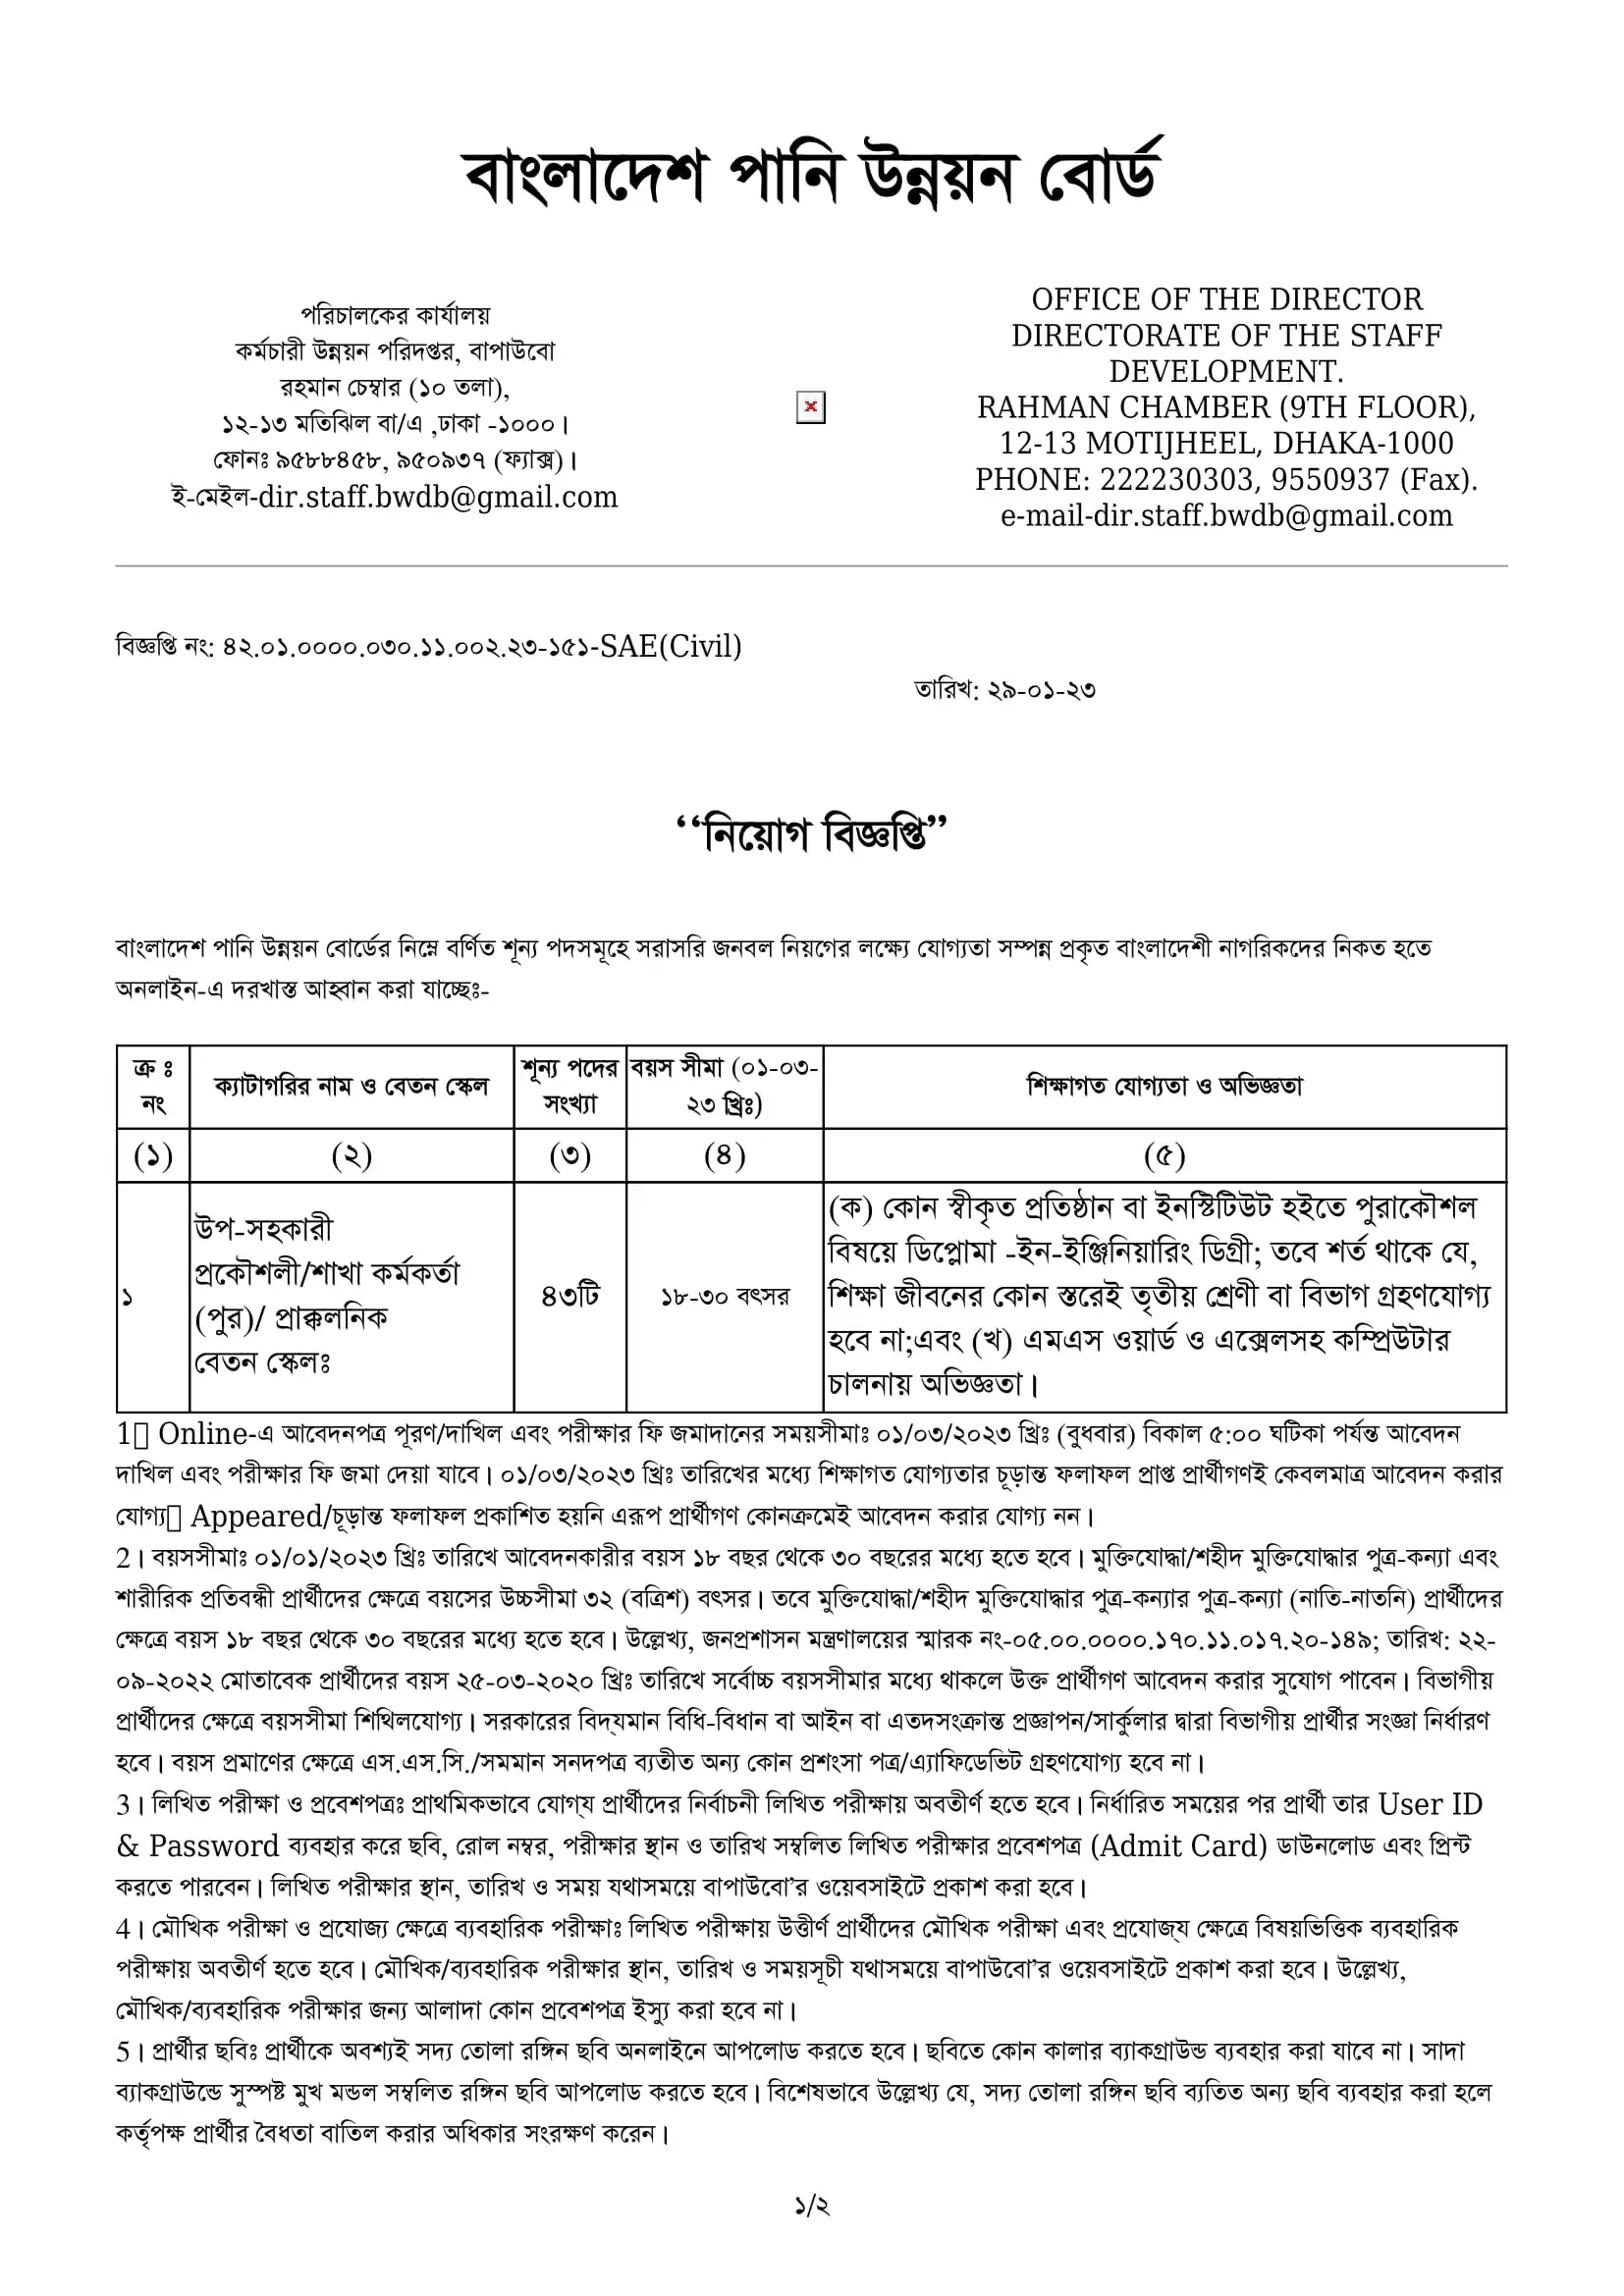 First page of Bangladesh Water Development Board recruitment circular published on 29 January 2023